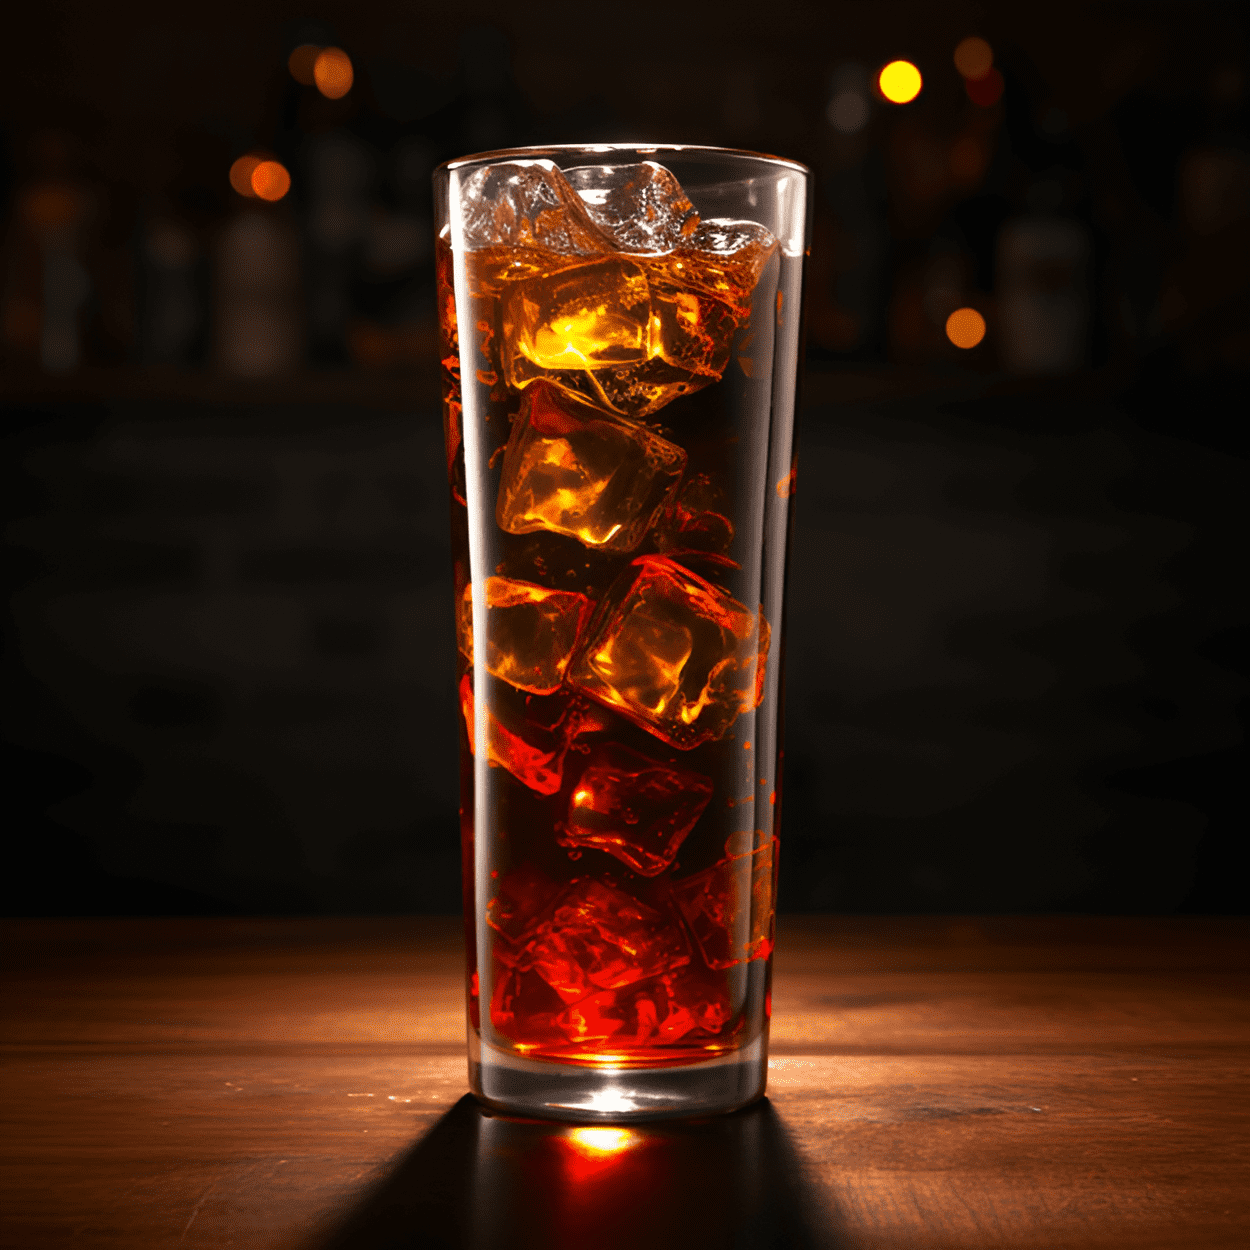 Jägerbomb Recipe - The Jägerbomb is a sweet, strong, and slightly herbal cocktail. The energy drink gives it a sweet and tangy flavor, while the Jägermeister adds a complex herbal note. The combination creates a unique, bold taste that's both refreshing and invigorating.